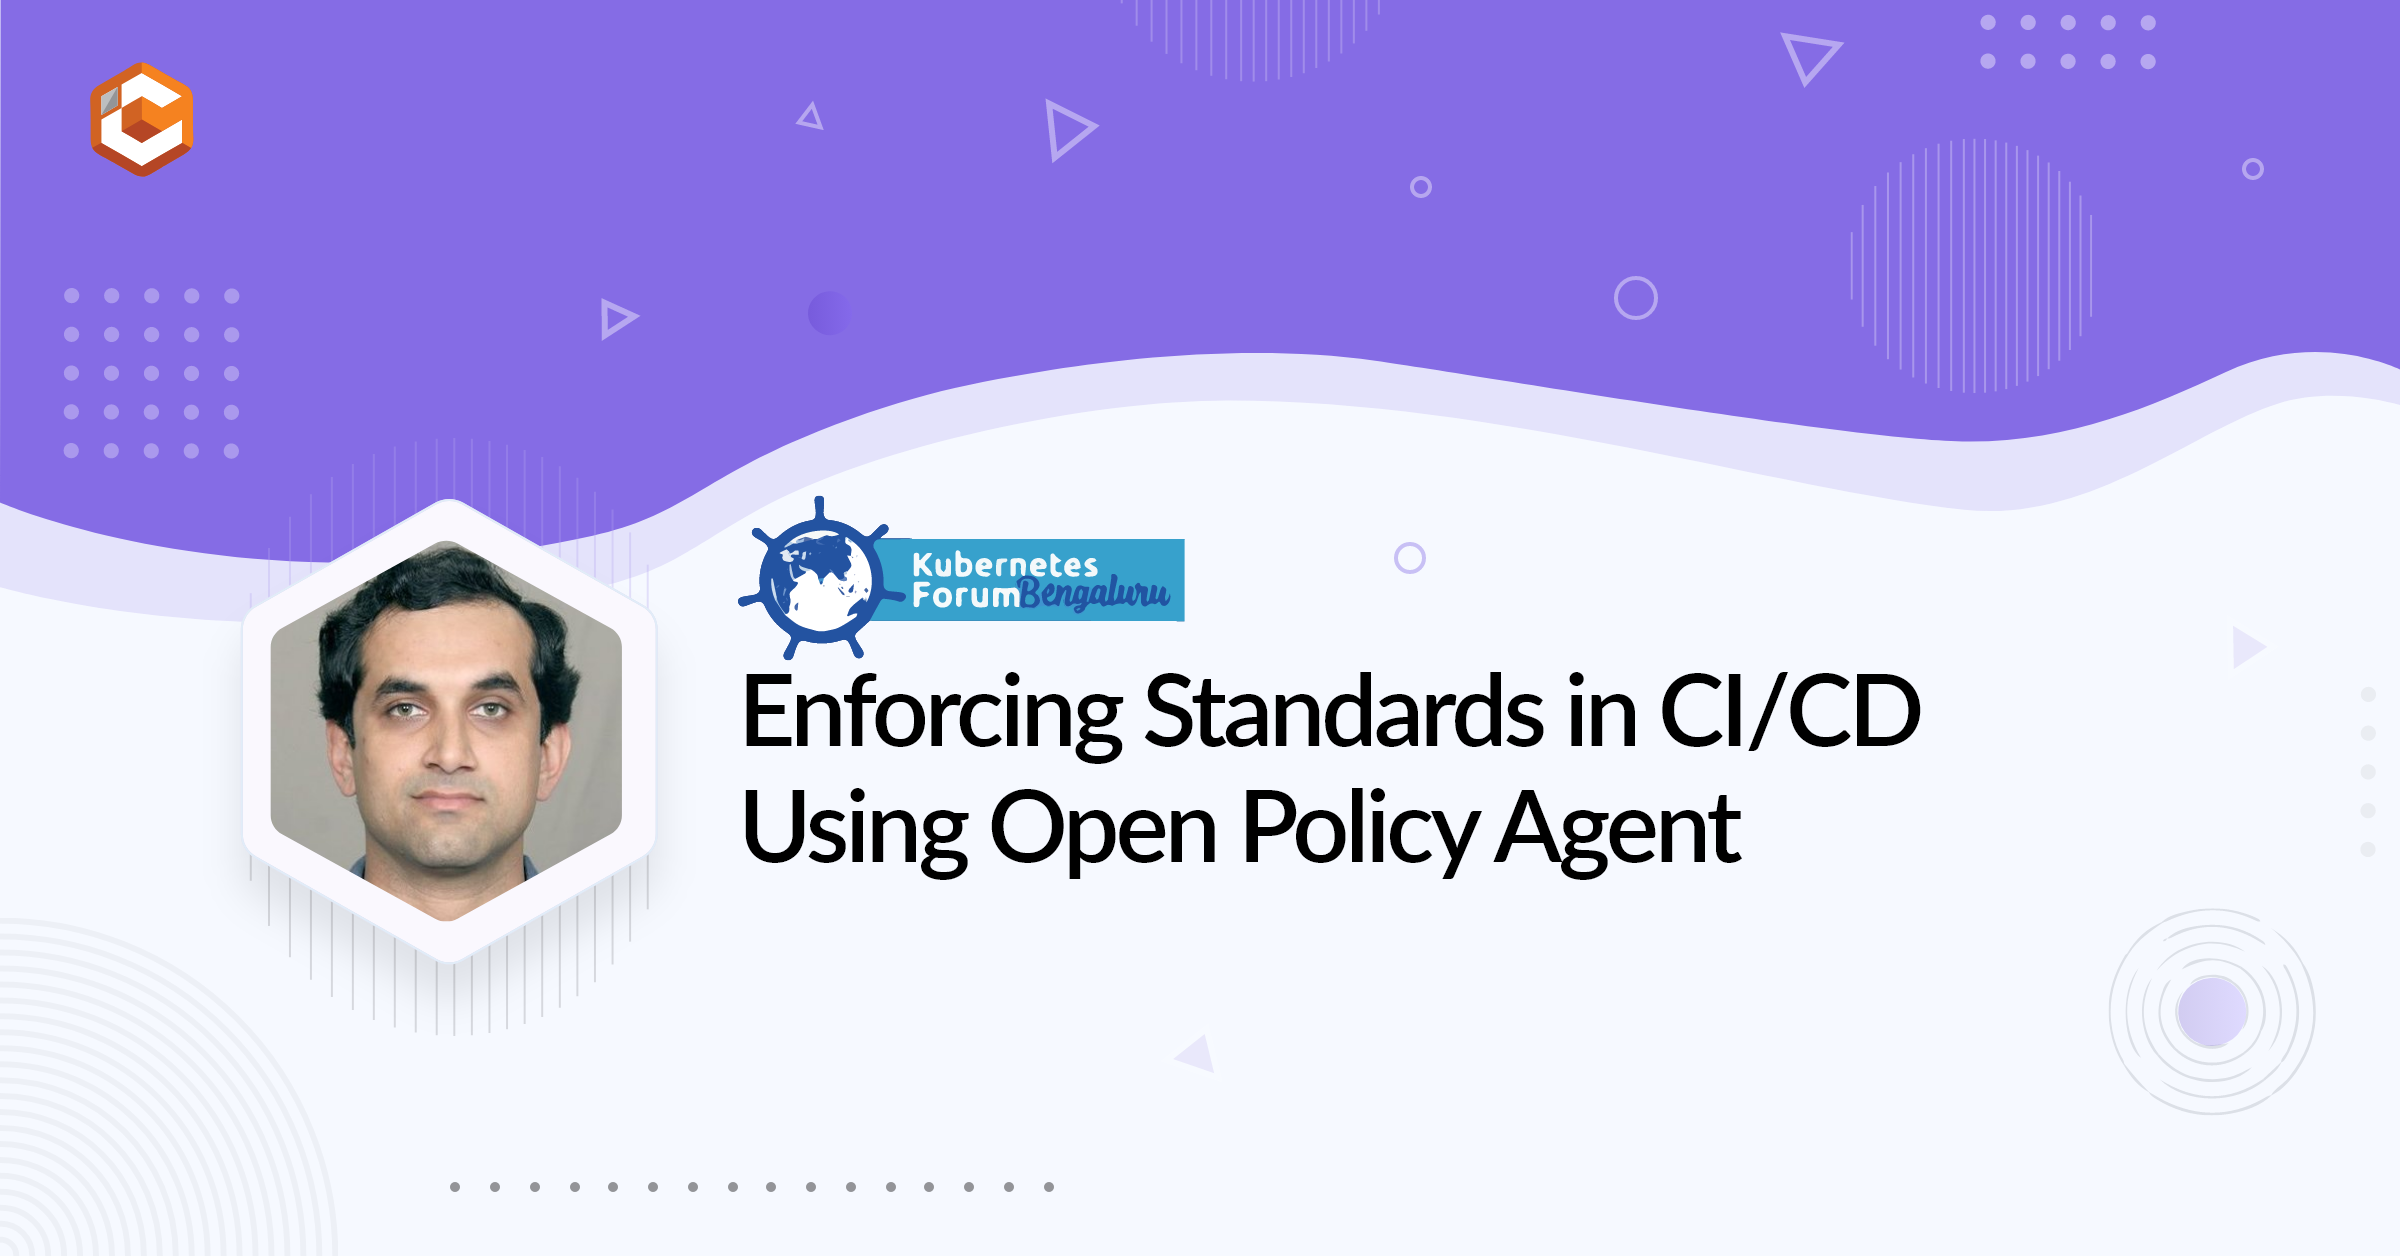 Enforcing Standards in CI/CD Using Open Policy Agent